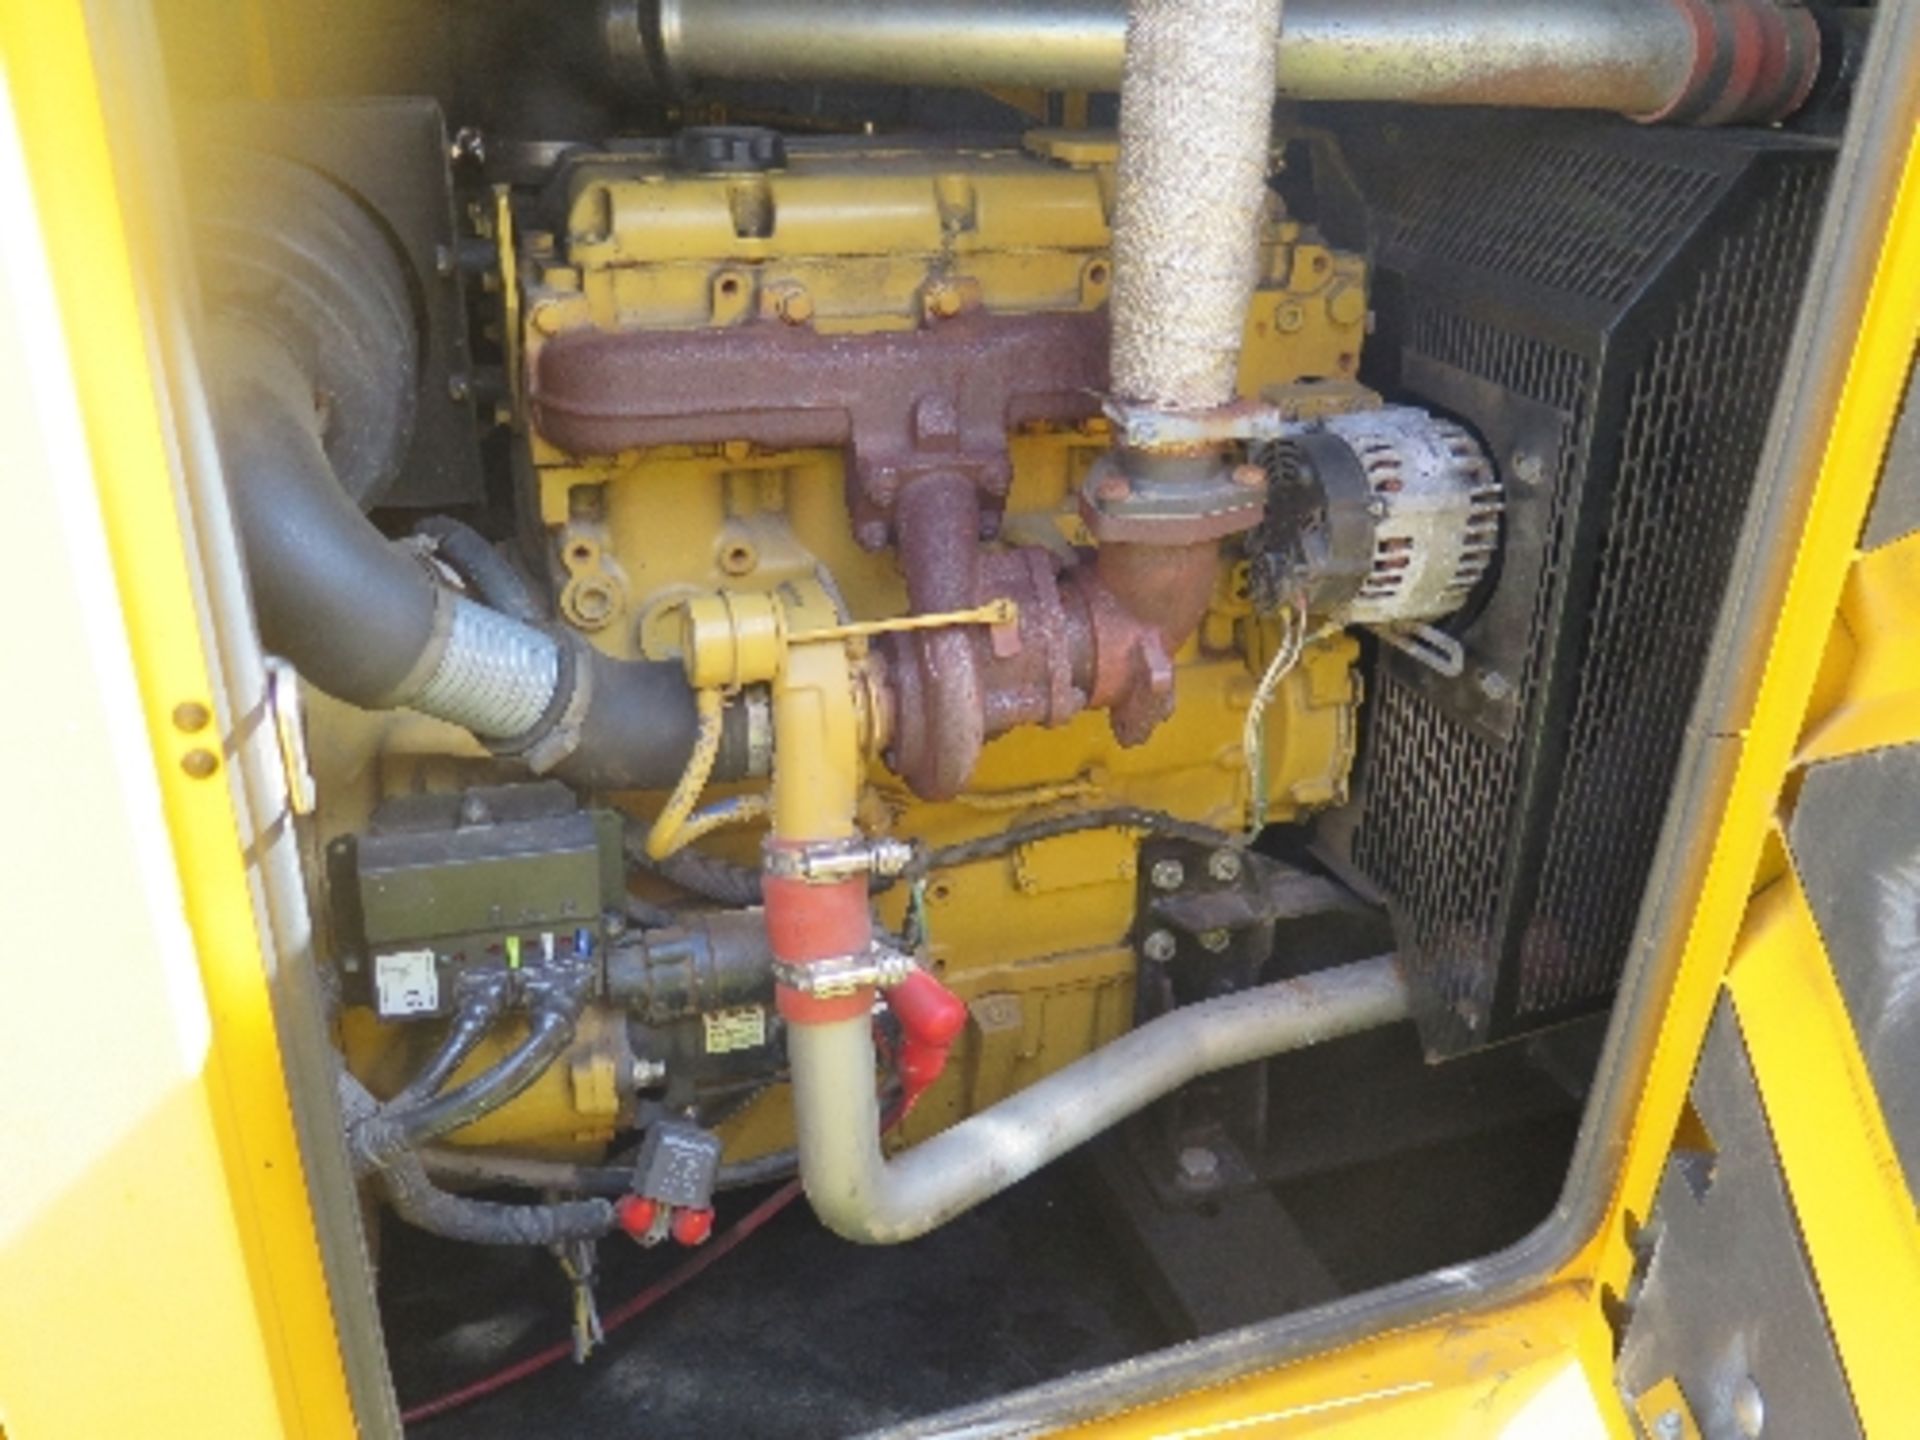 Caterpillar XQE80 generator 17821 hrs 5003858
PERKINS POWER - RUNS AND MAKES POWER
ALL LOTS are - Image 6 of 6